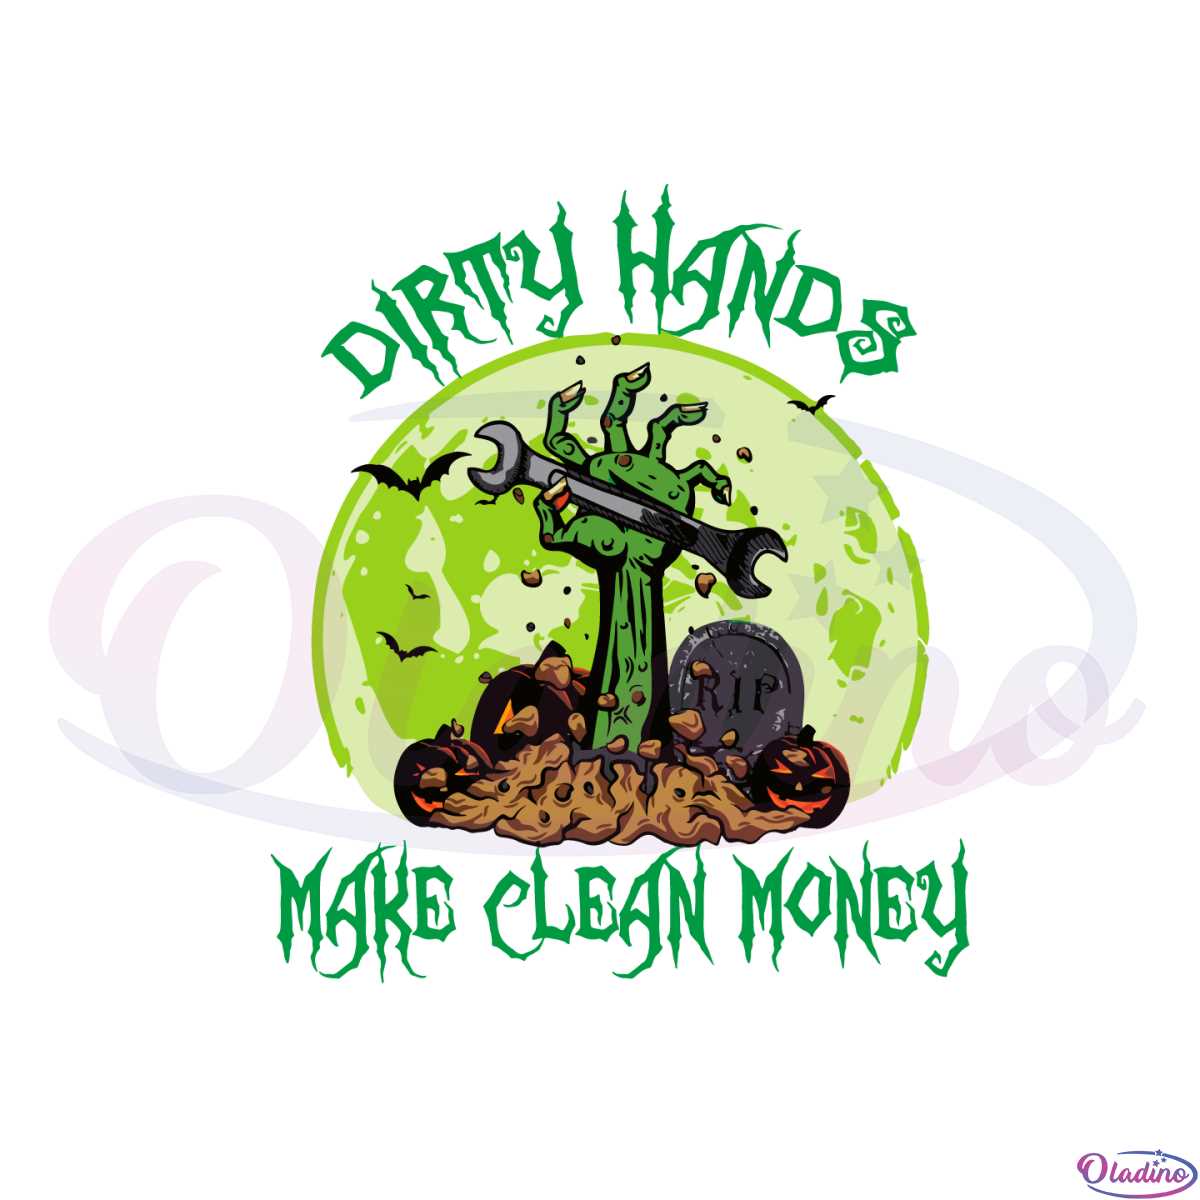 dirty-hands-make-clean-money-svg-graphic-designs-files